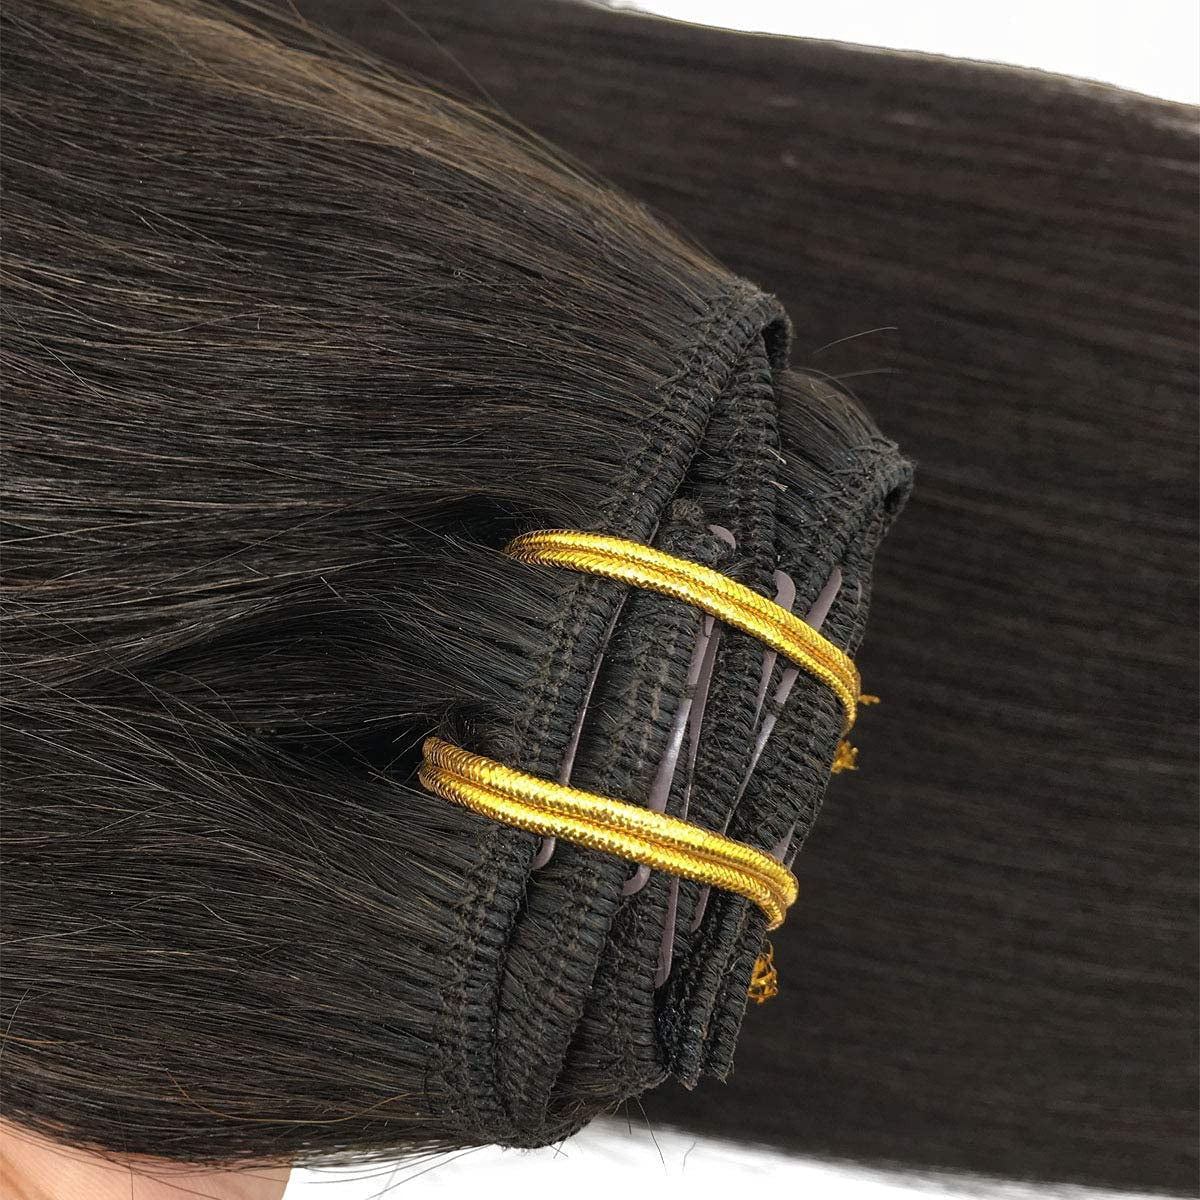 GOO GOO Clip-In Hair Extensions for Women, Soft & Natural, Handmade Real Human Hair Extensions, Dark Brown, Long, Straight #2, 7Pcs 120G 18 Inches